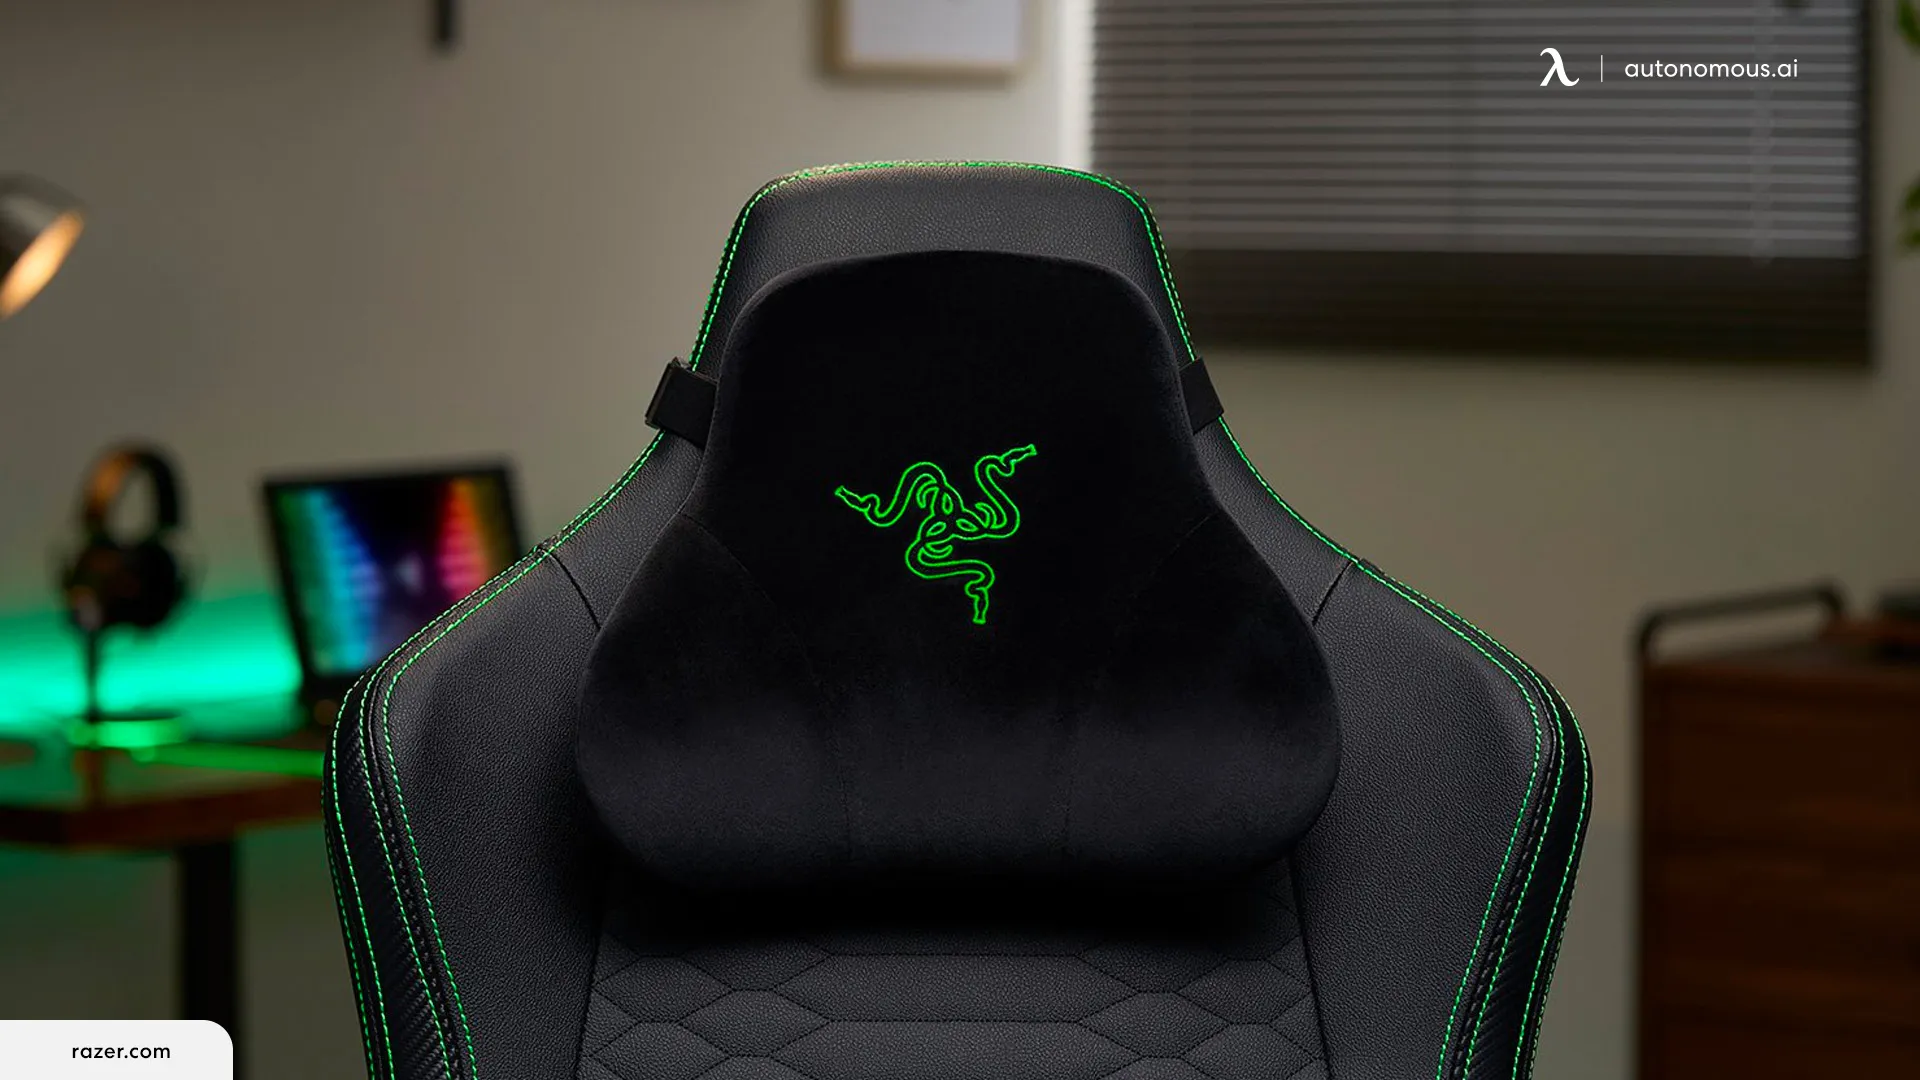 Revolutionize Gaming with Tailored Cushion Comfort